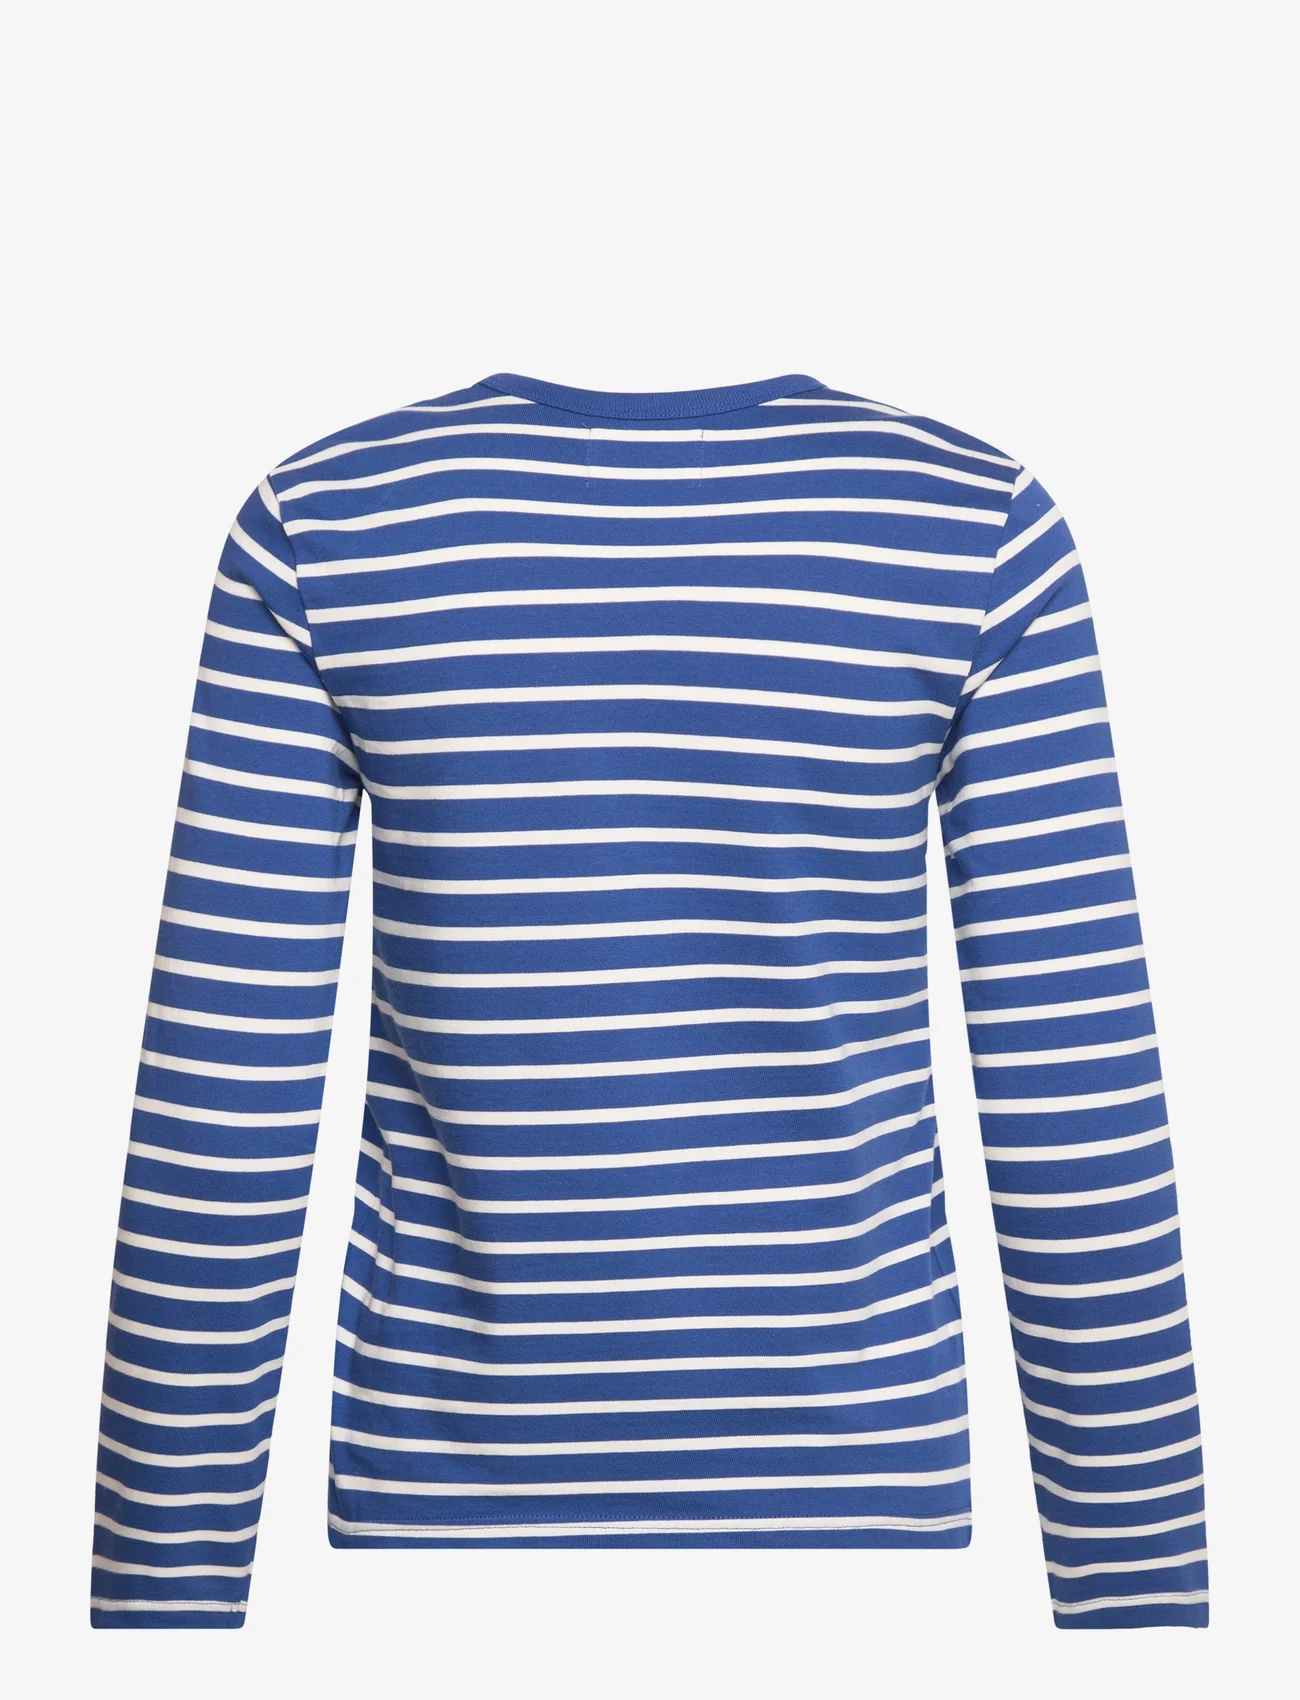 Double A by Wood Wood - Moa longsleeve - t-shirt & tops - limoges striped - 1